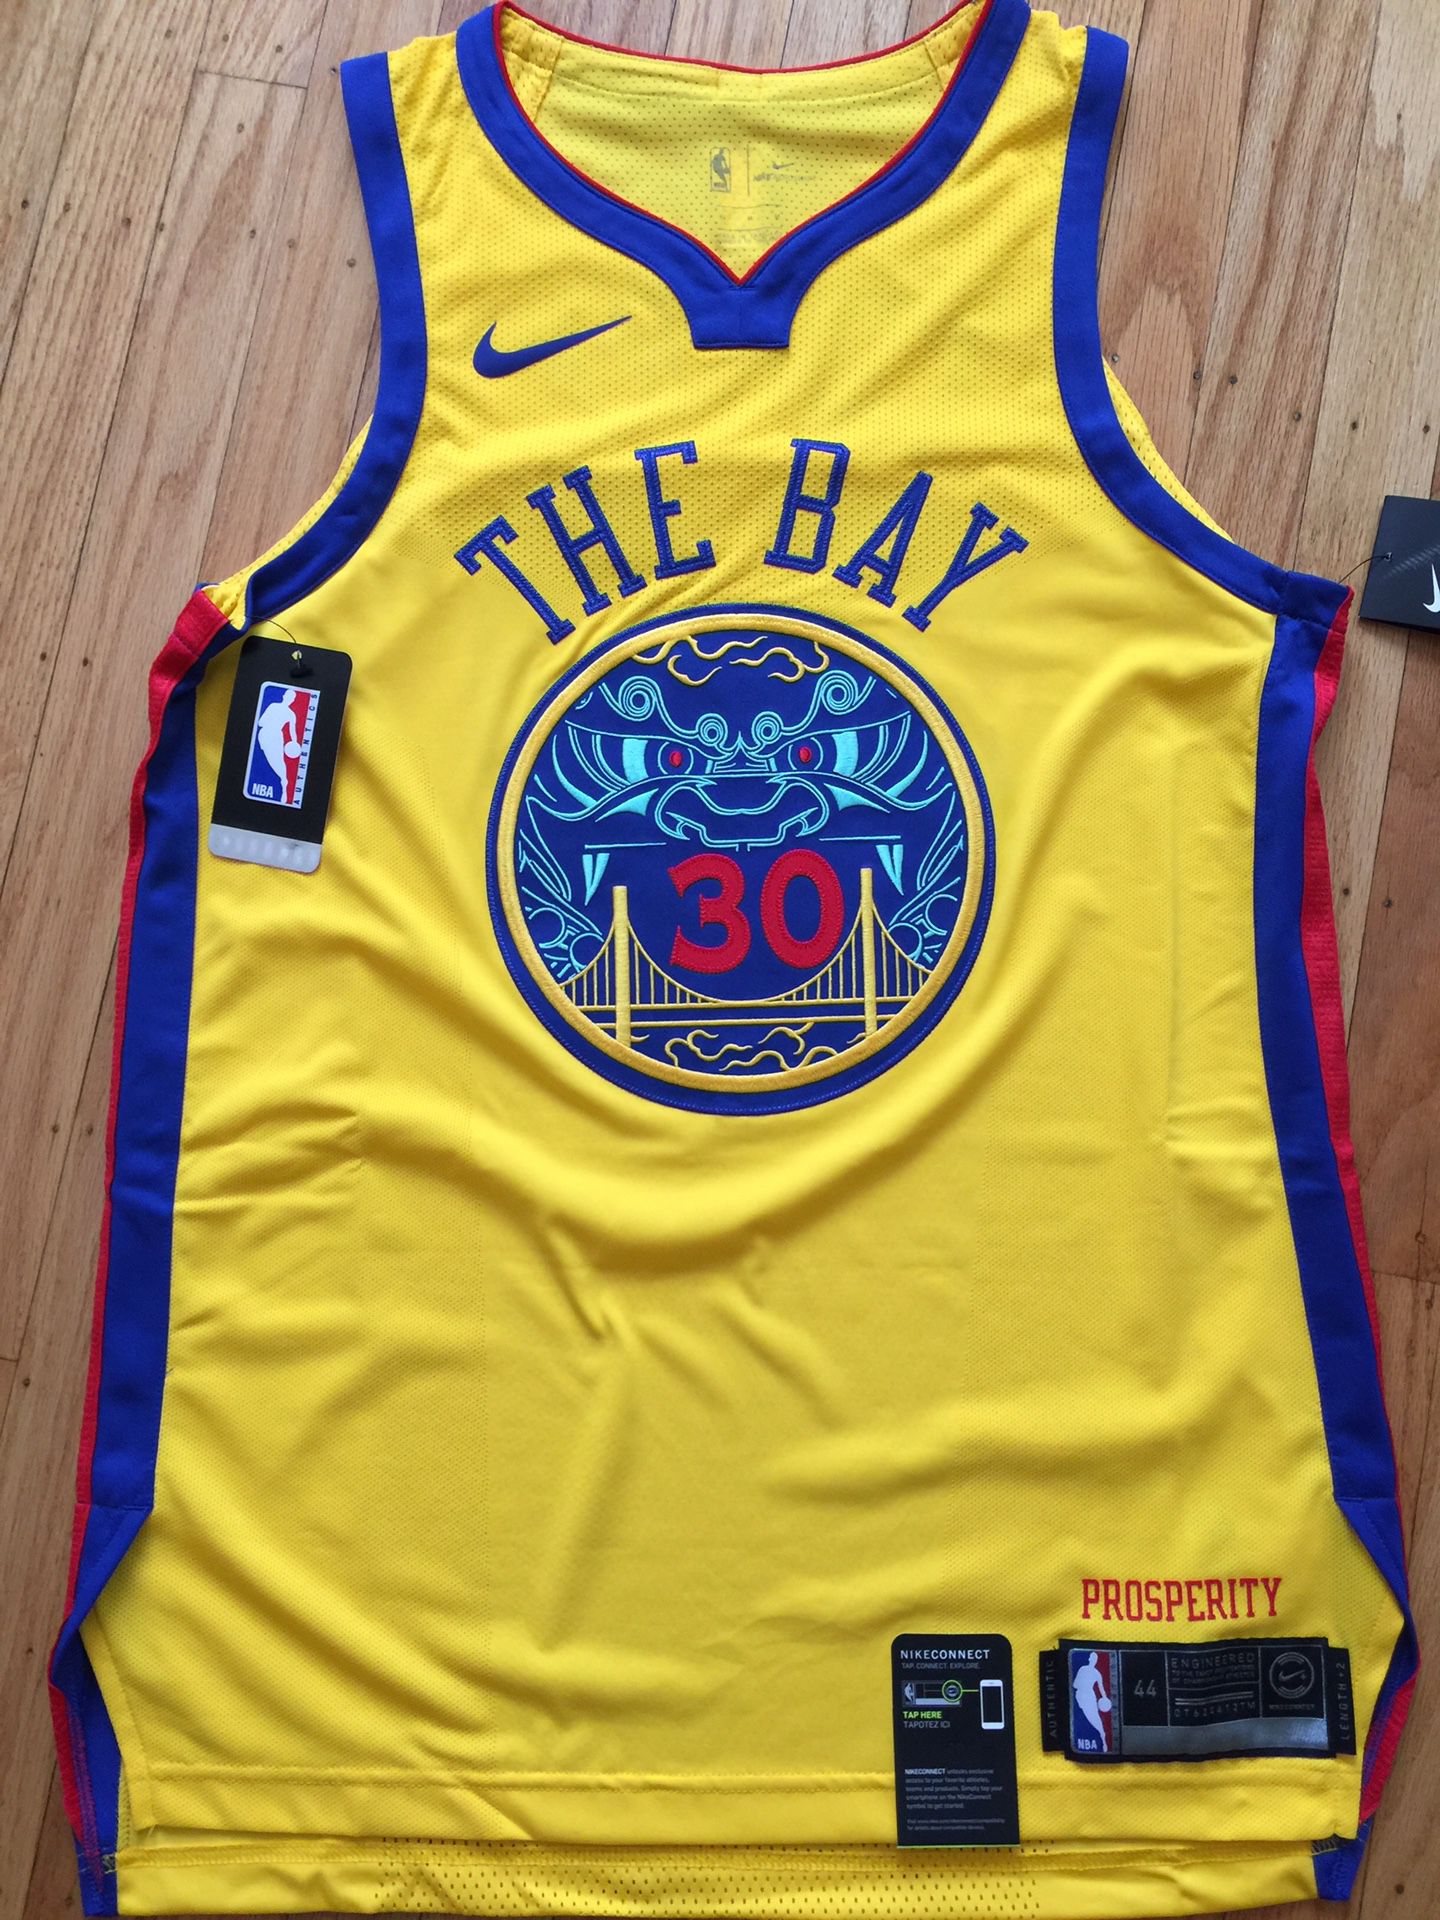 Throw back Steph Curry Jersey for Sale in San Francisco, CA - OfferUp